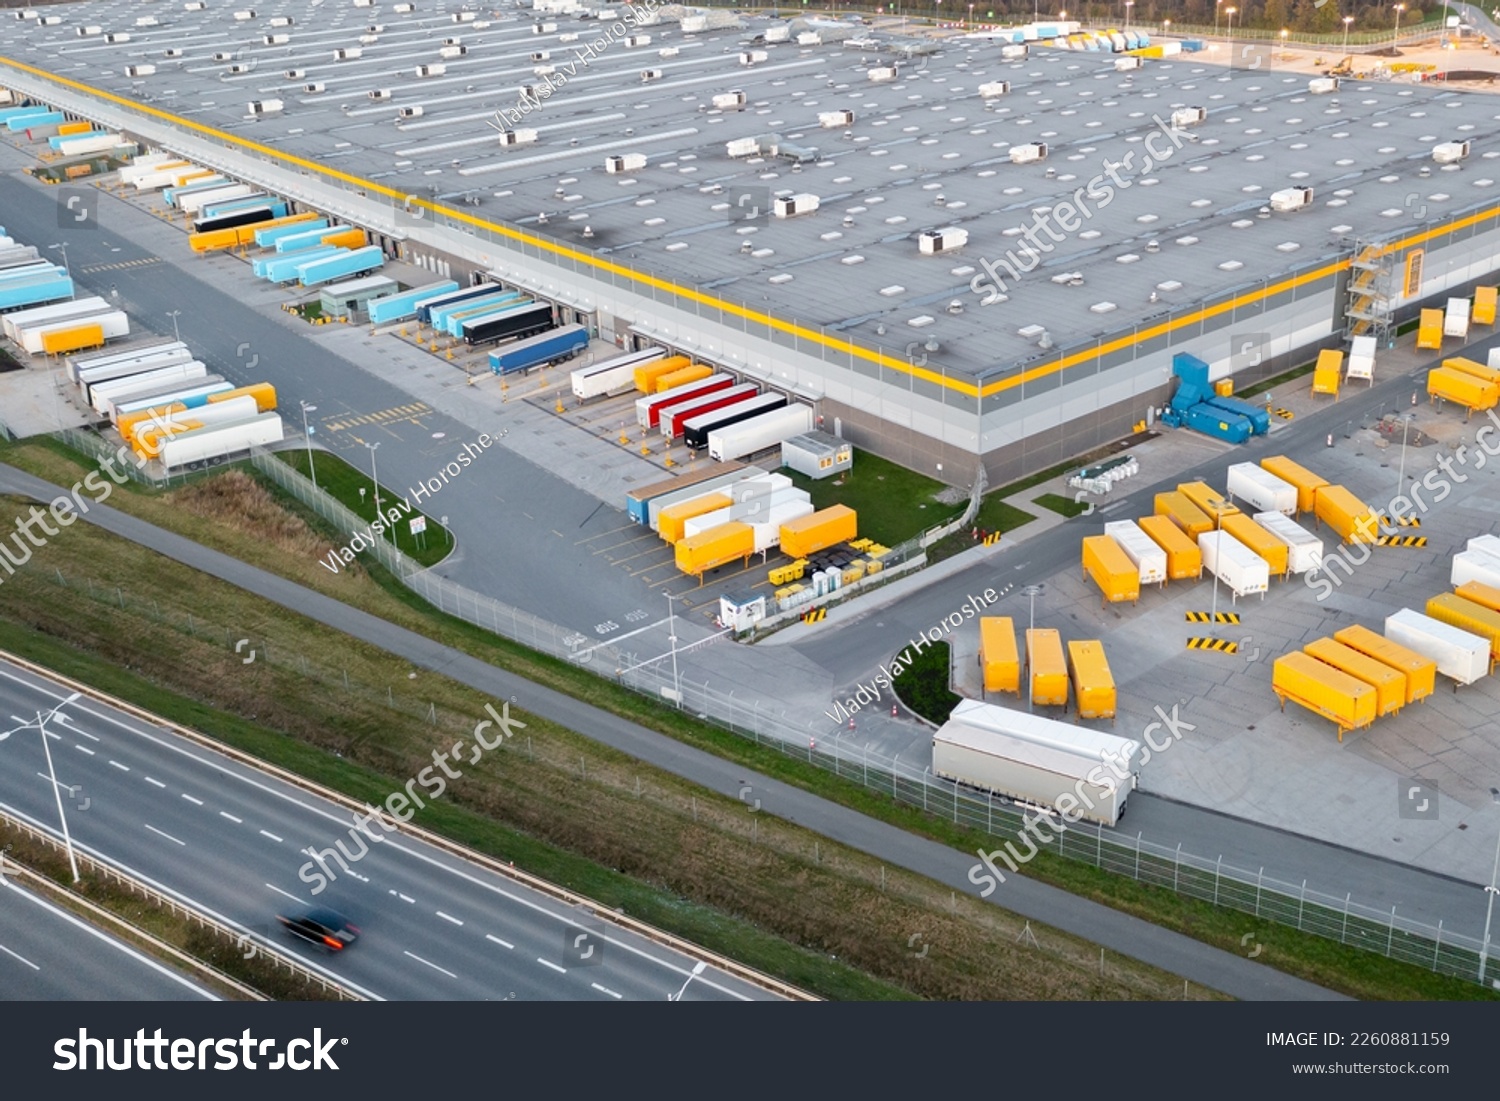 Many large semi-trailers are parked next to the logistics warehouse, waiting to be loaded for transport around the country. #2260881159